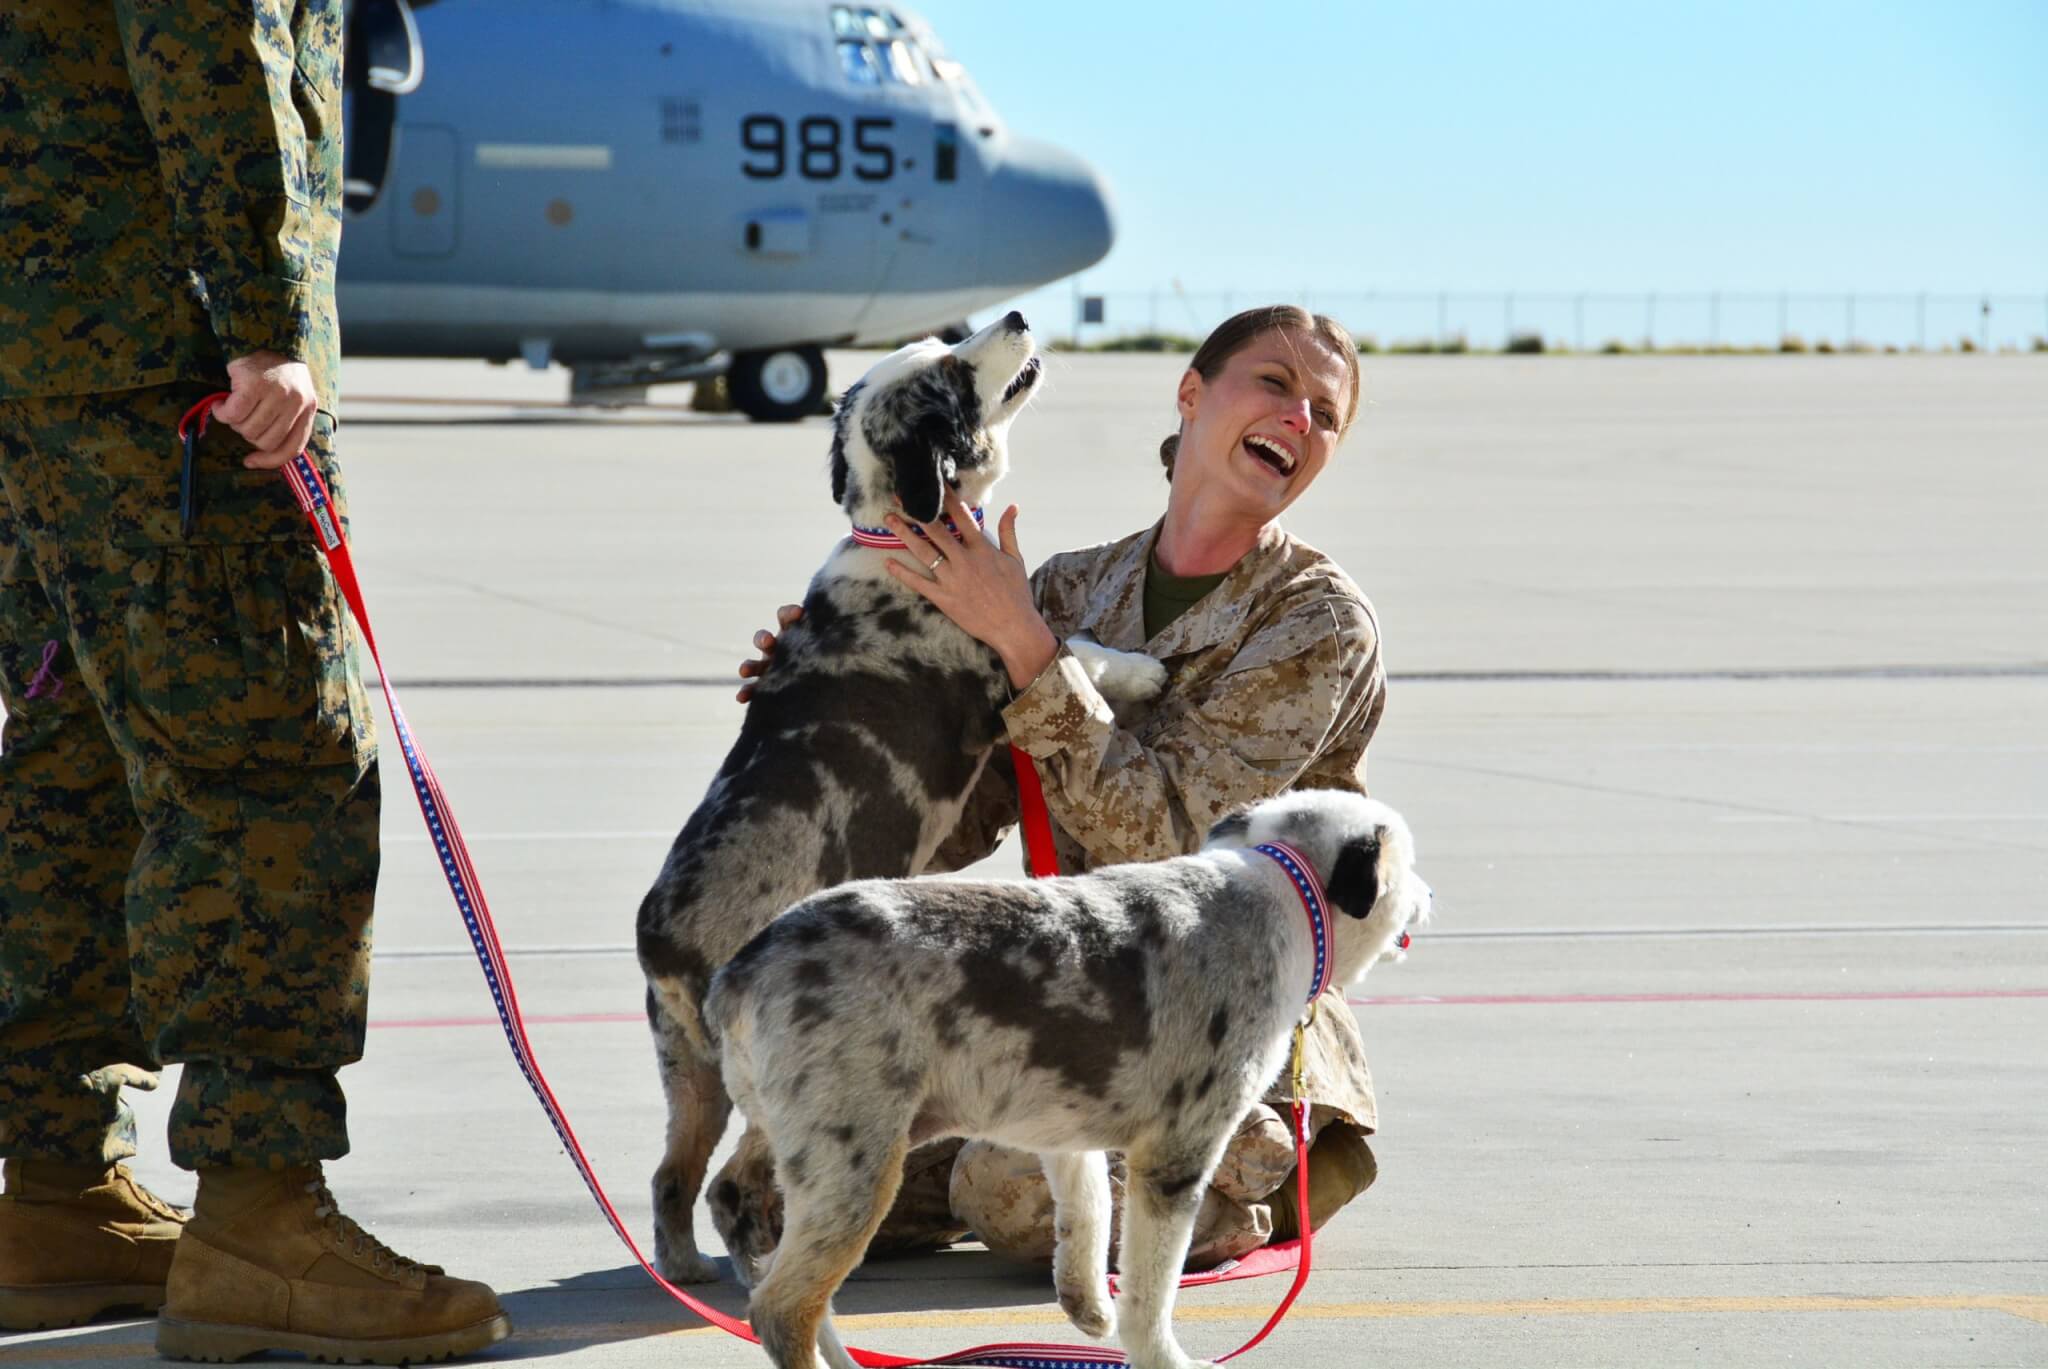 Photo courtesy of Dogs on Deployment.